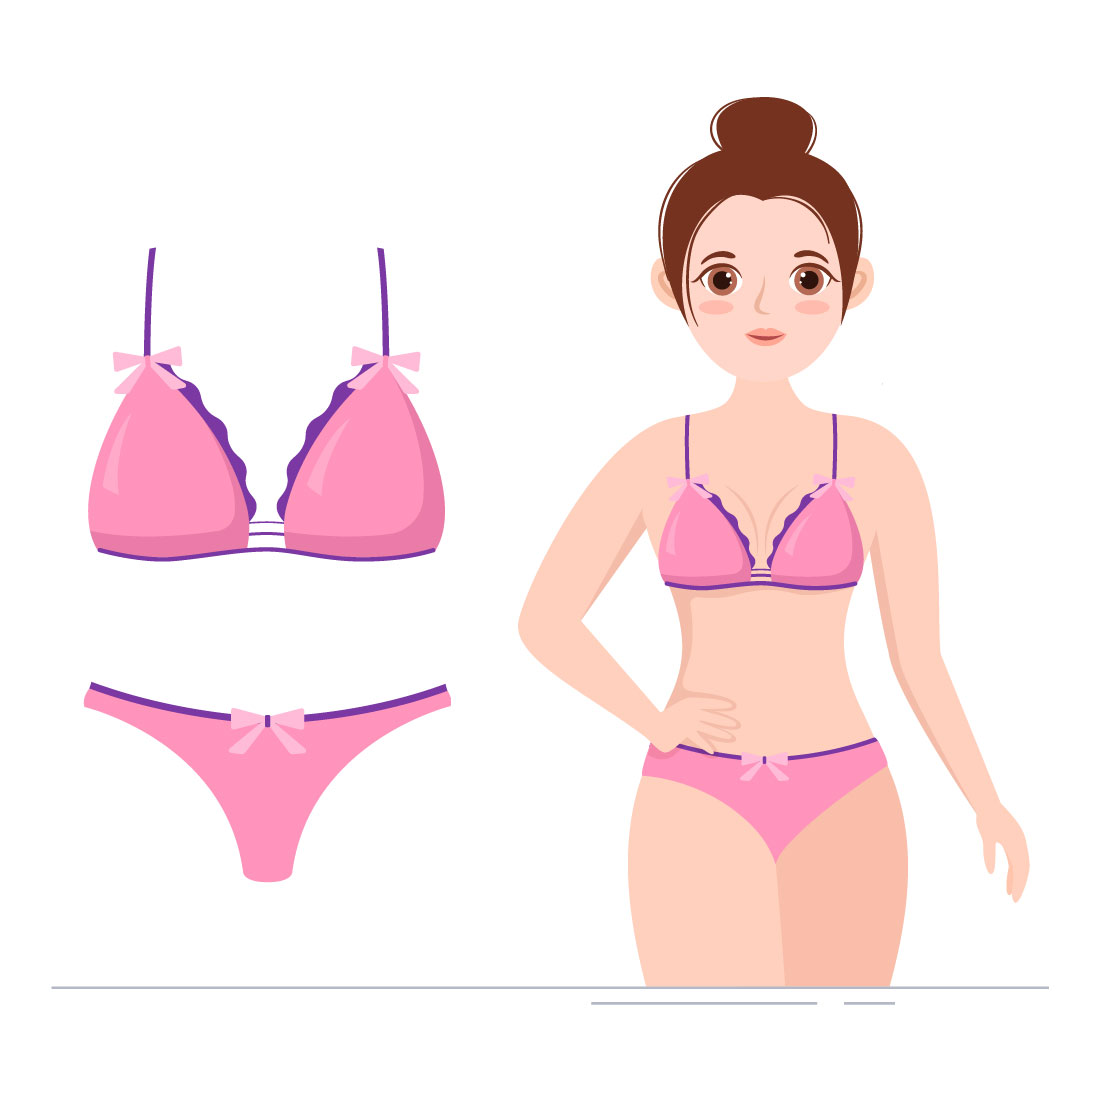 Colorful cartoon image of a girl in stylish lingerie.